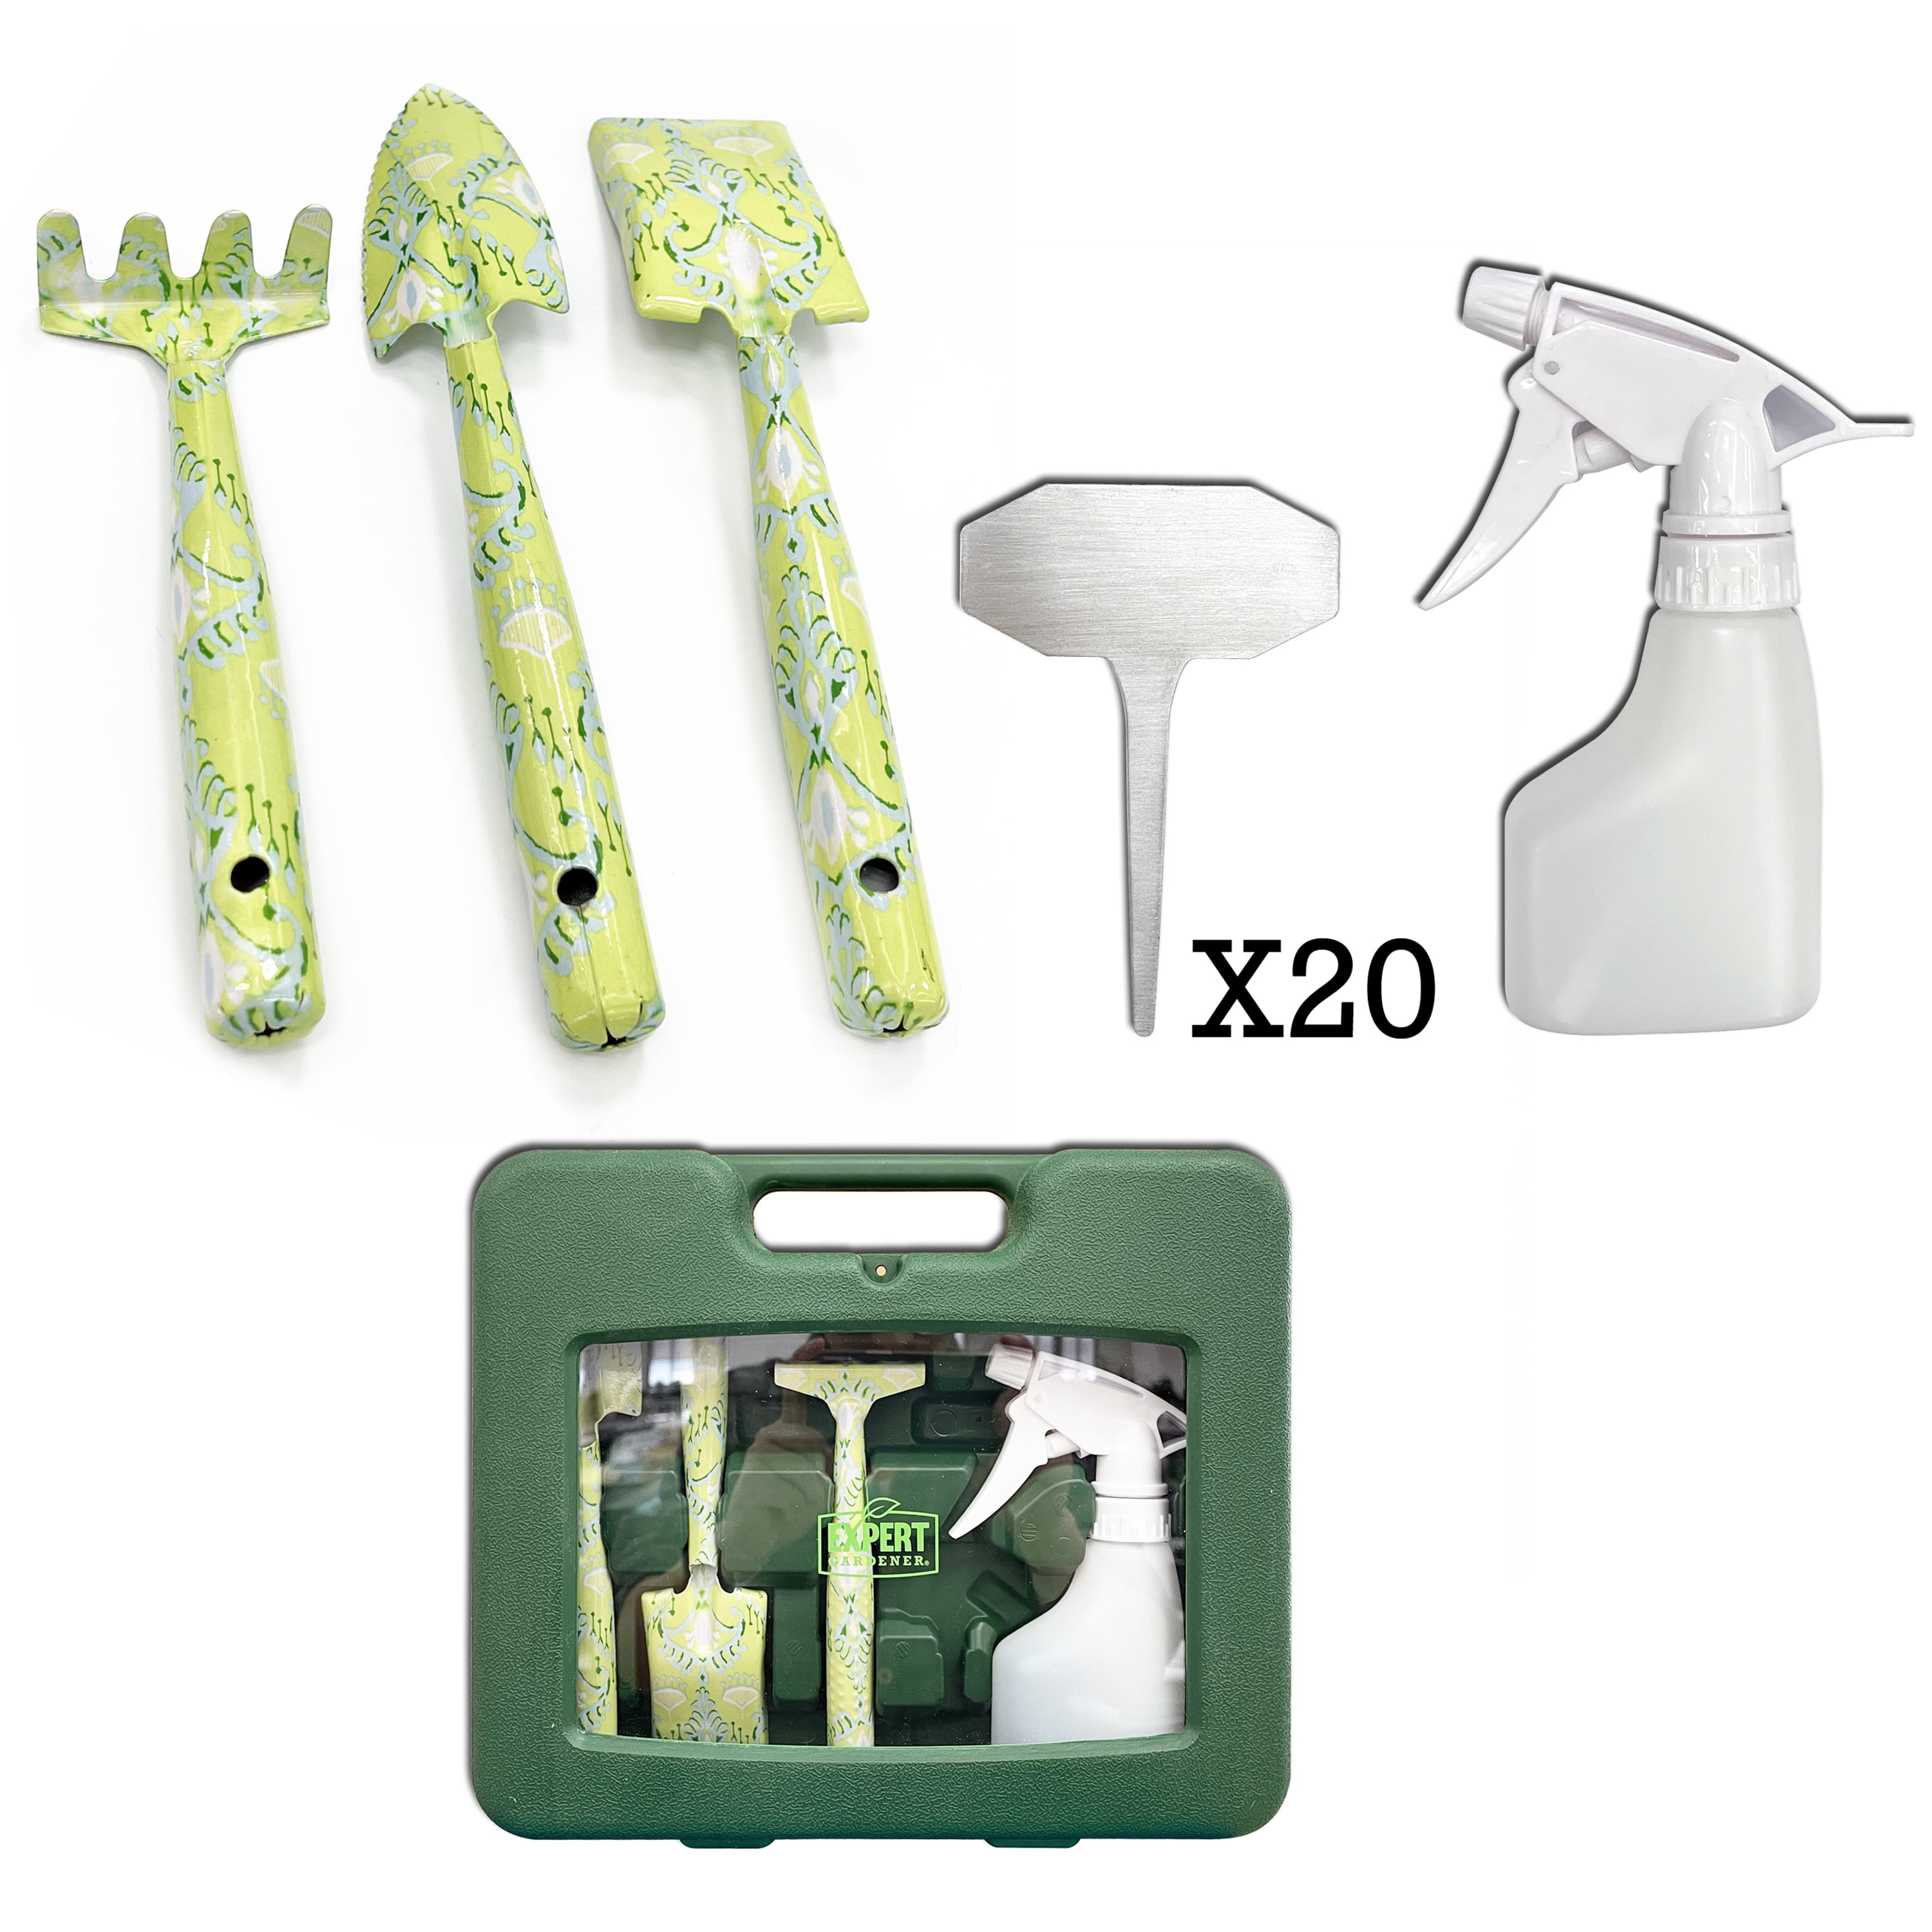 10pc Garden Tool Set Vegetable Flower Gardening Hand Tools Kits w/ Carrying Case 